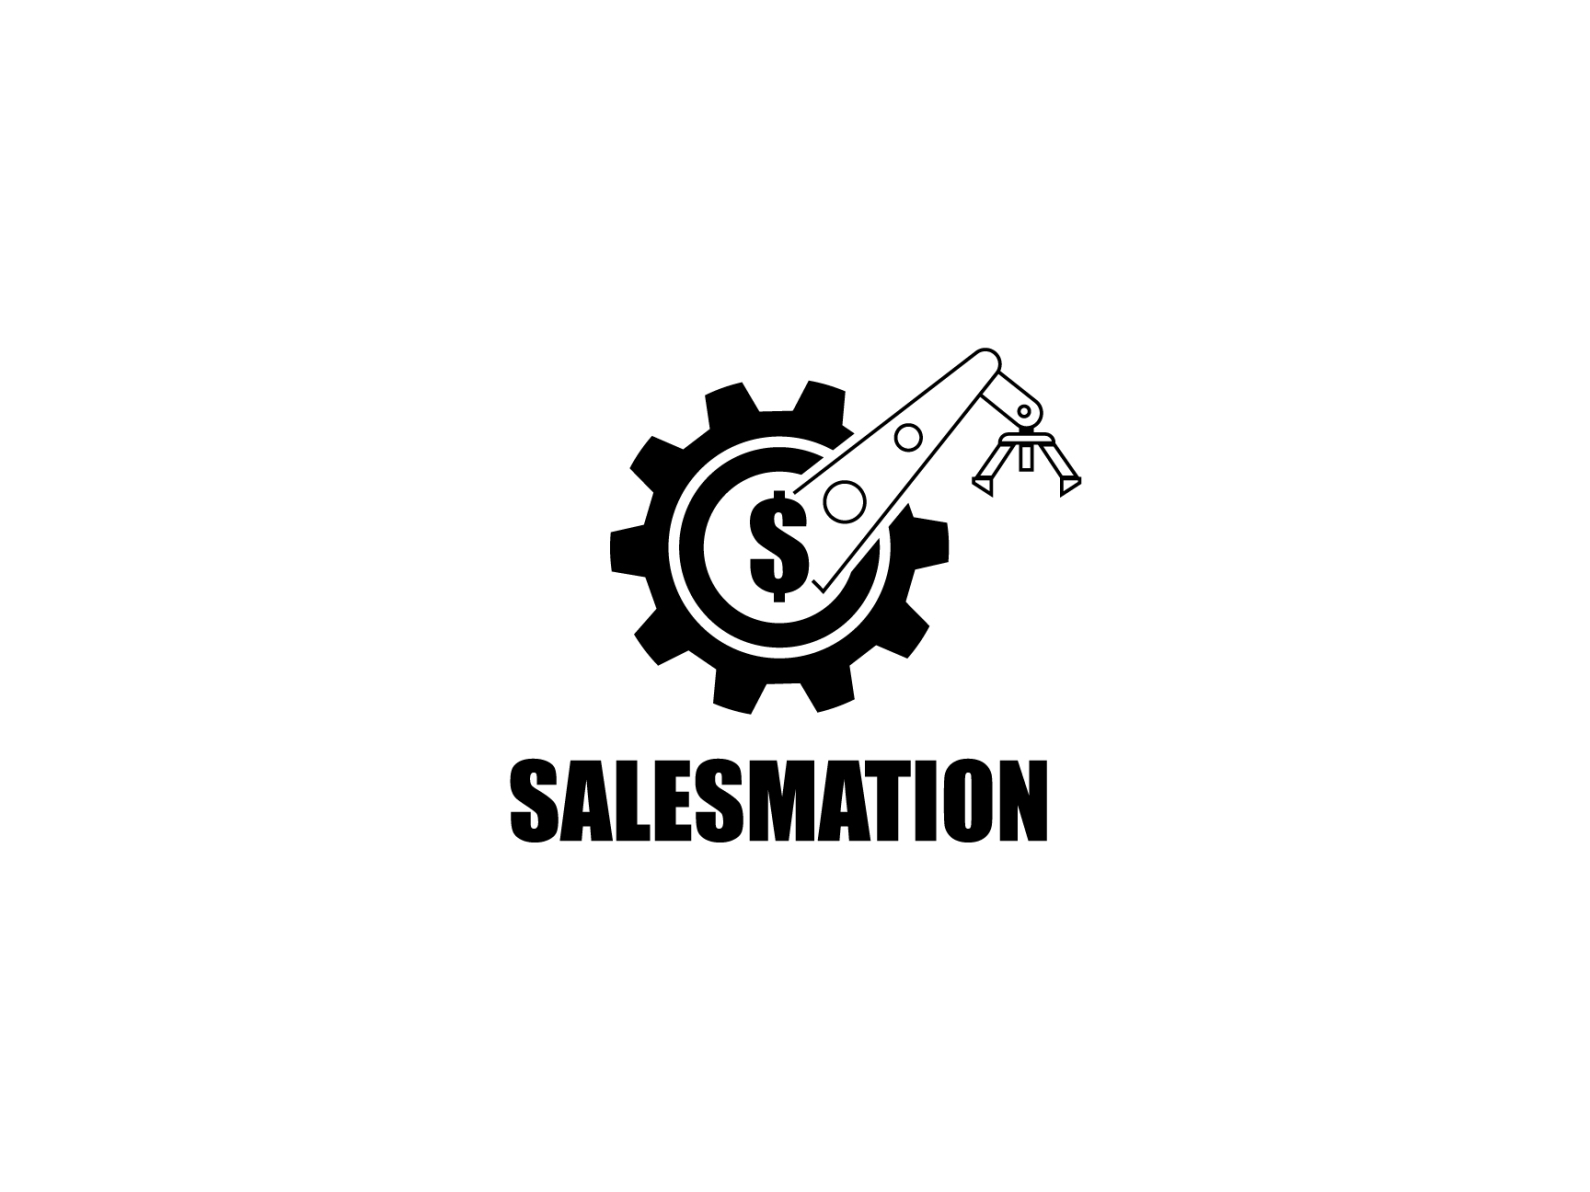 Automation logo by Md Abir Sikder on Dribbble